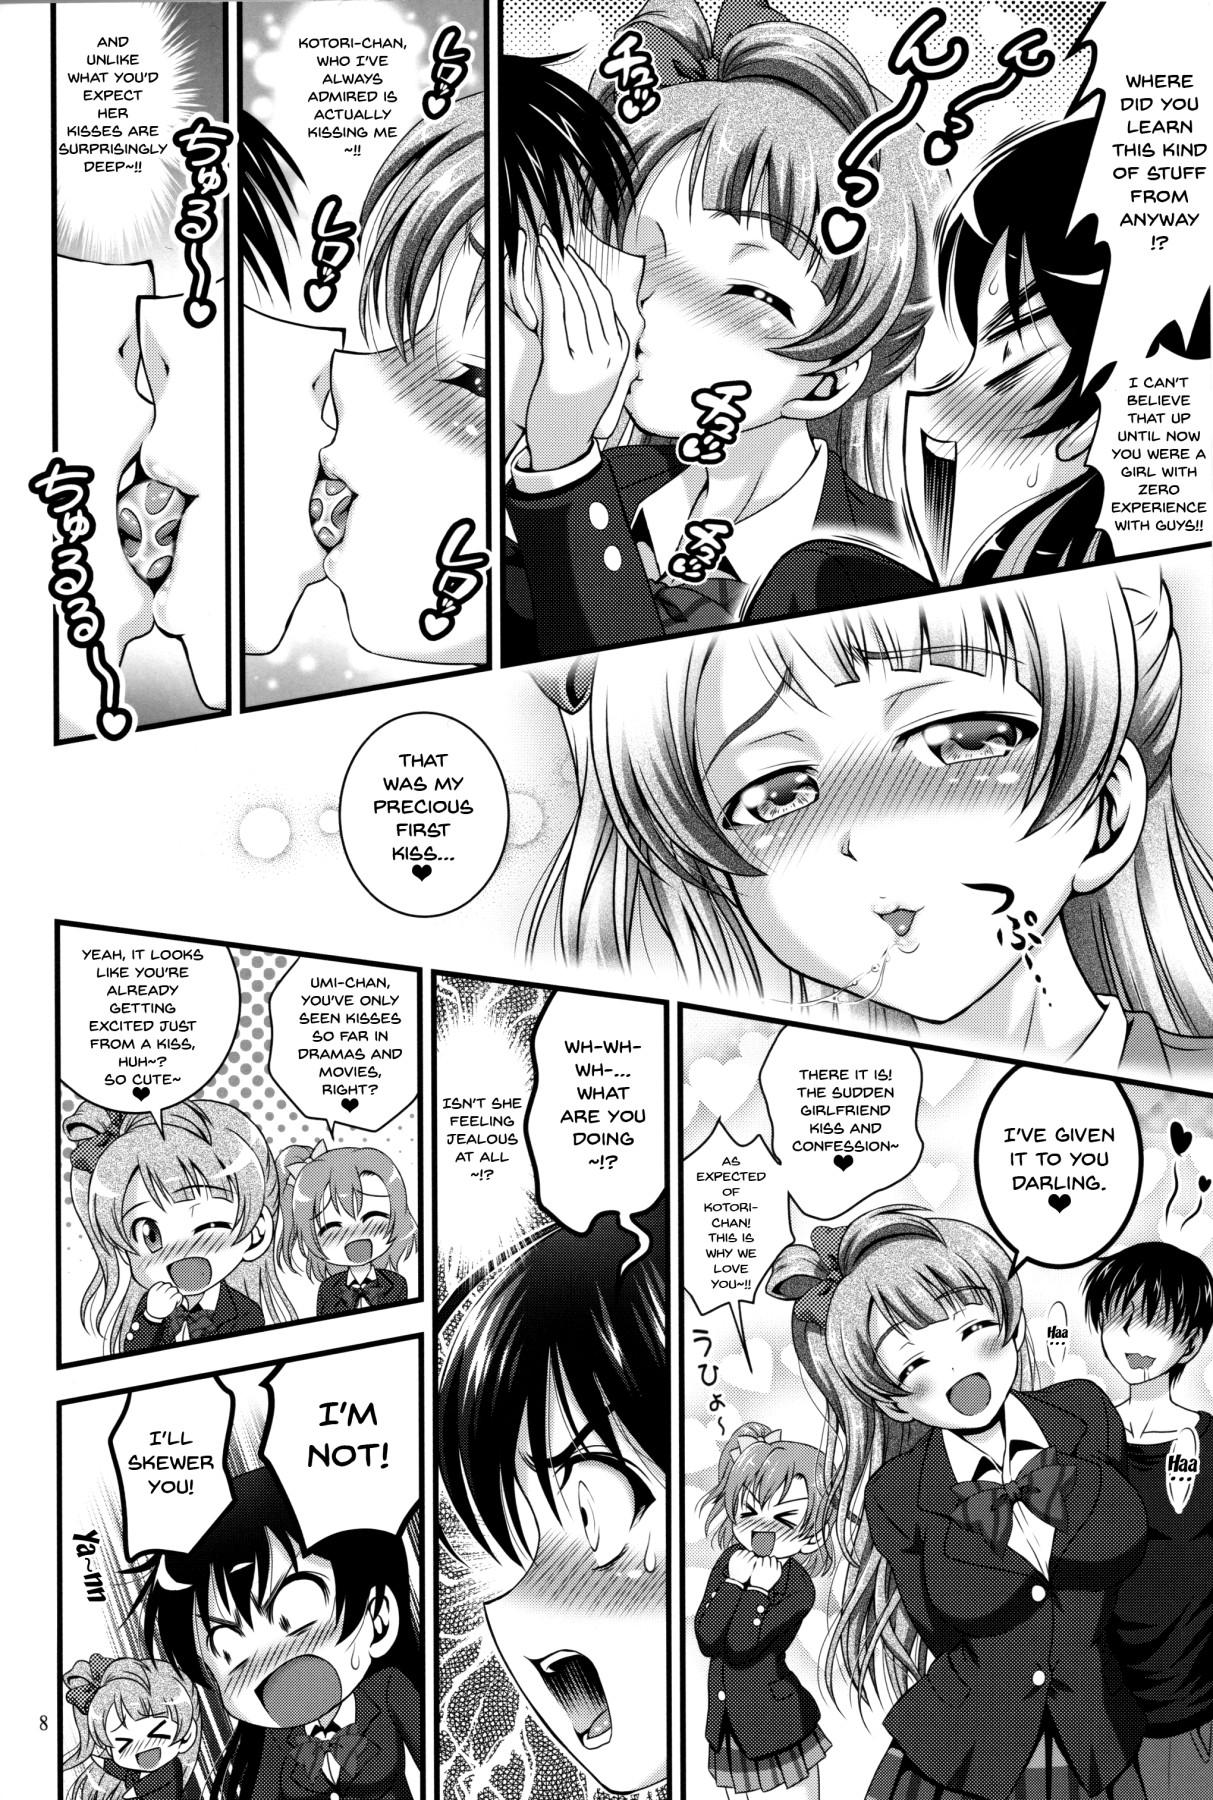 Desperate Ore Yome Saimin 4 | My Wife Hypnosis 4 - Love live Facials - Page 9